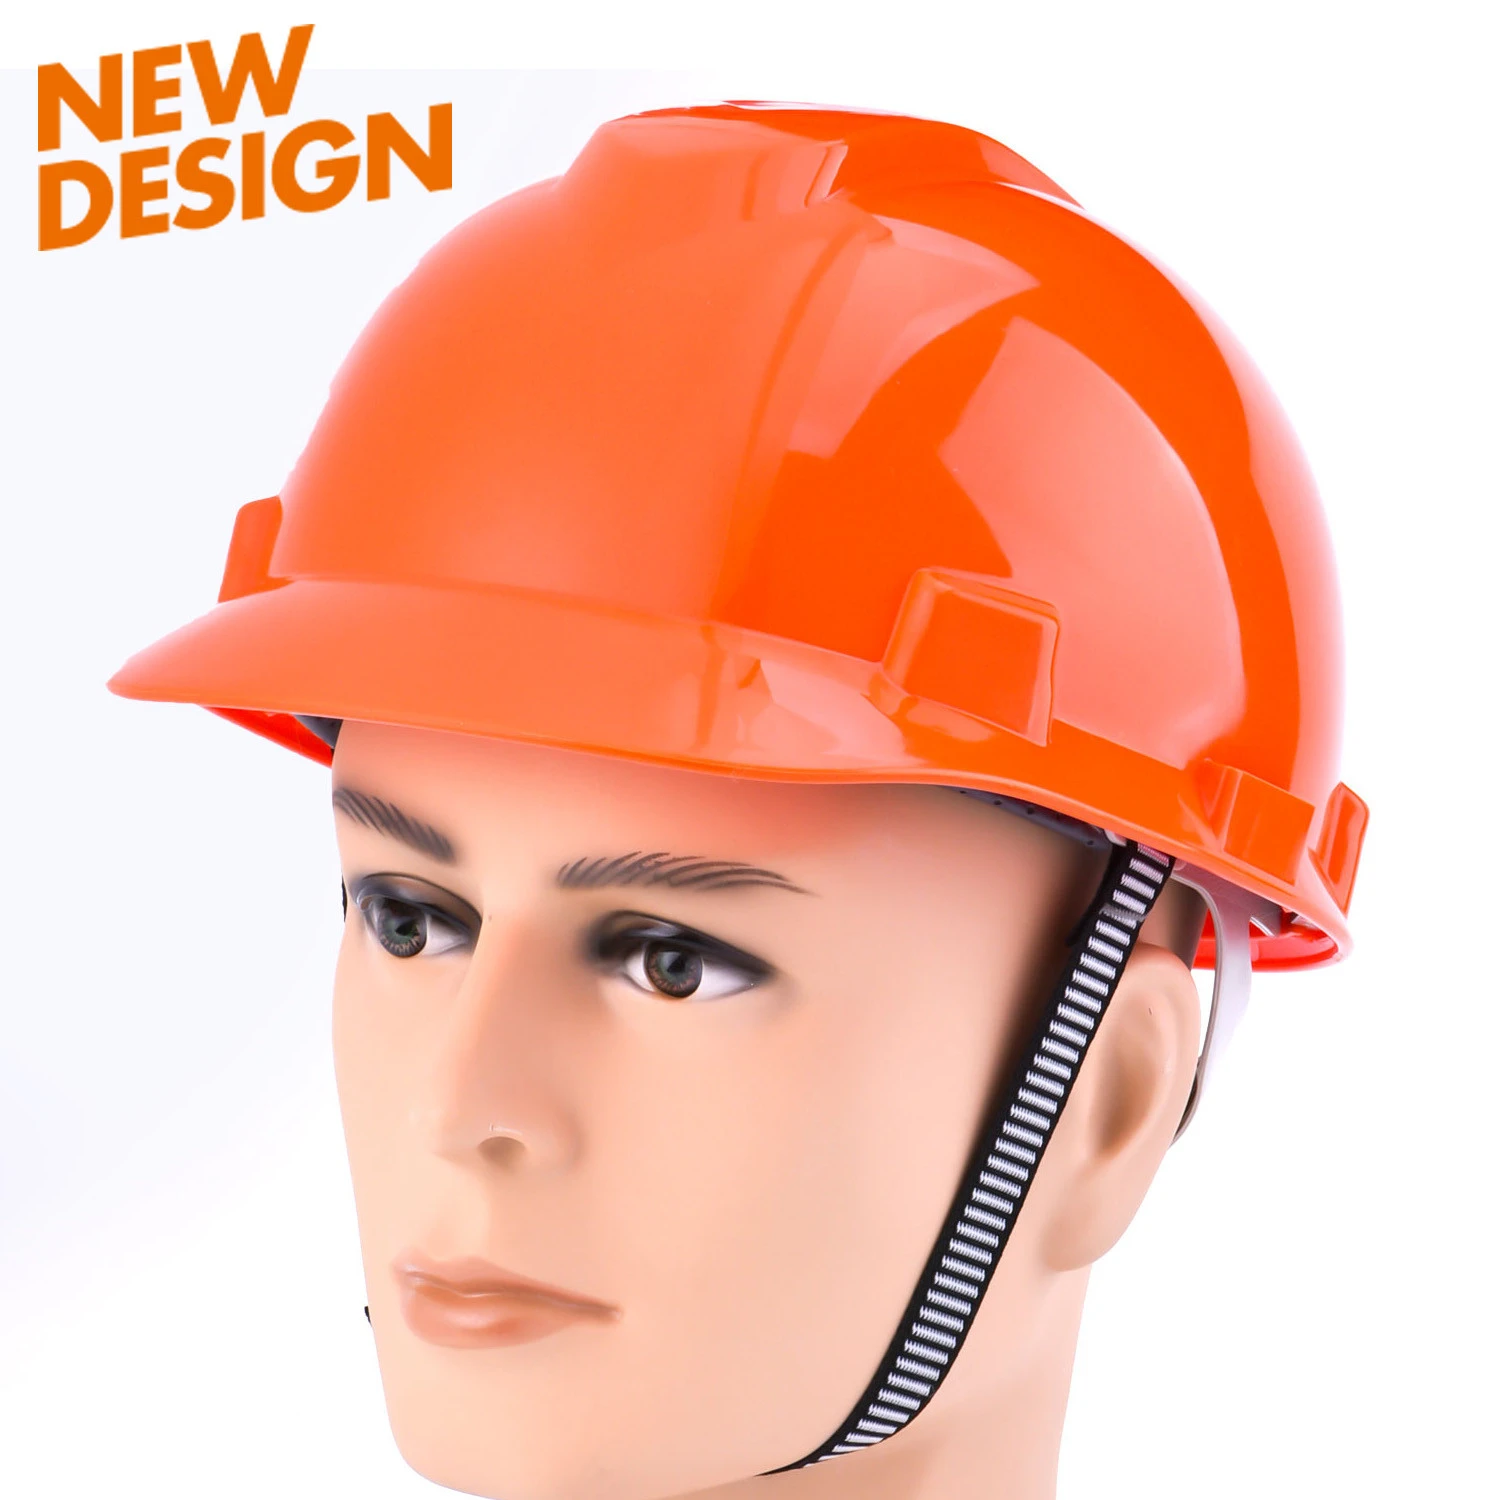 Personal Protective Equipment ABS Shell I Design Safety Helmet